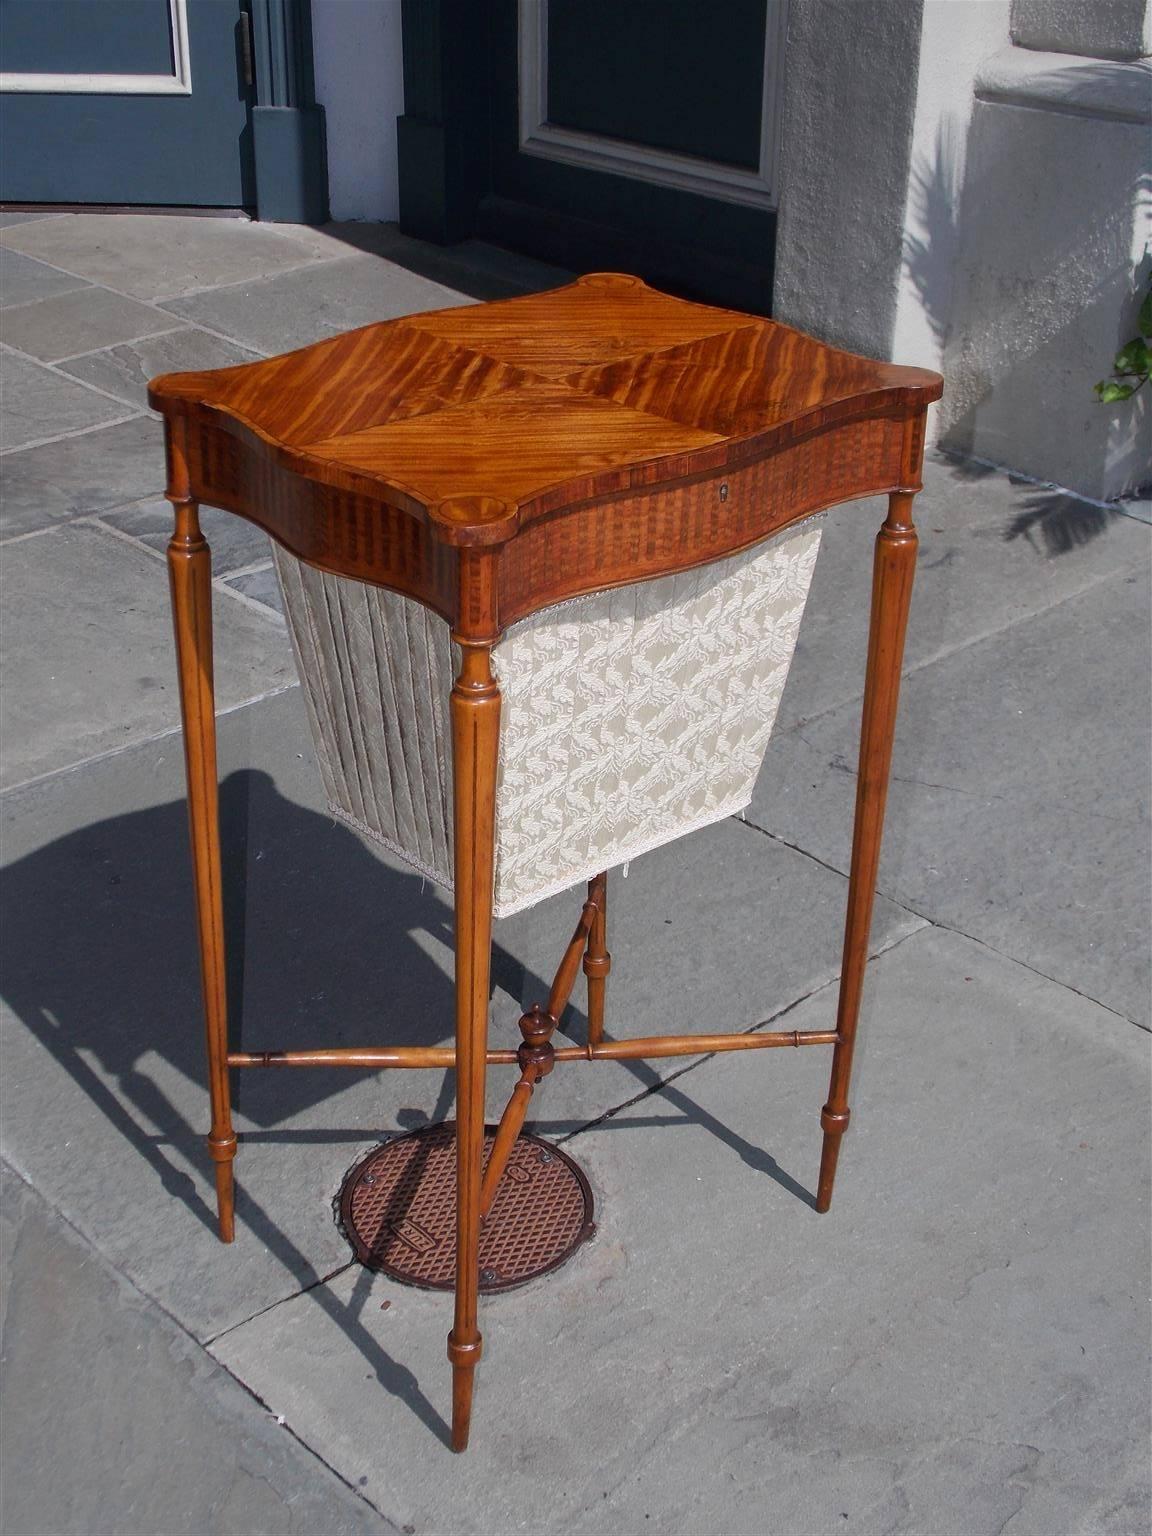 English Regency serpentine satinwood hinged sewing stand with outset corners, book matched lid, marquetry inlaid skirt, fitted compartmentalized interior with lift off tray, centered lower silk basket, and terminating on ring tapered inlaid legs